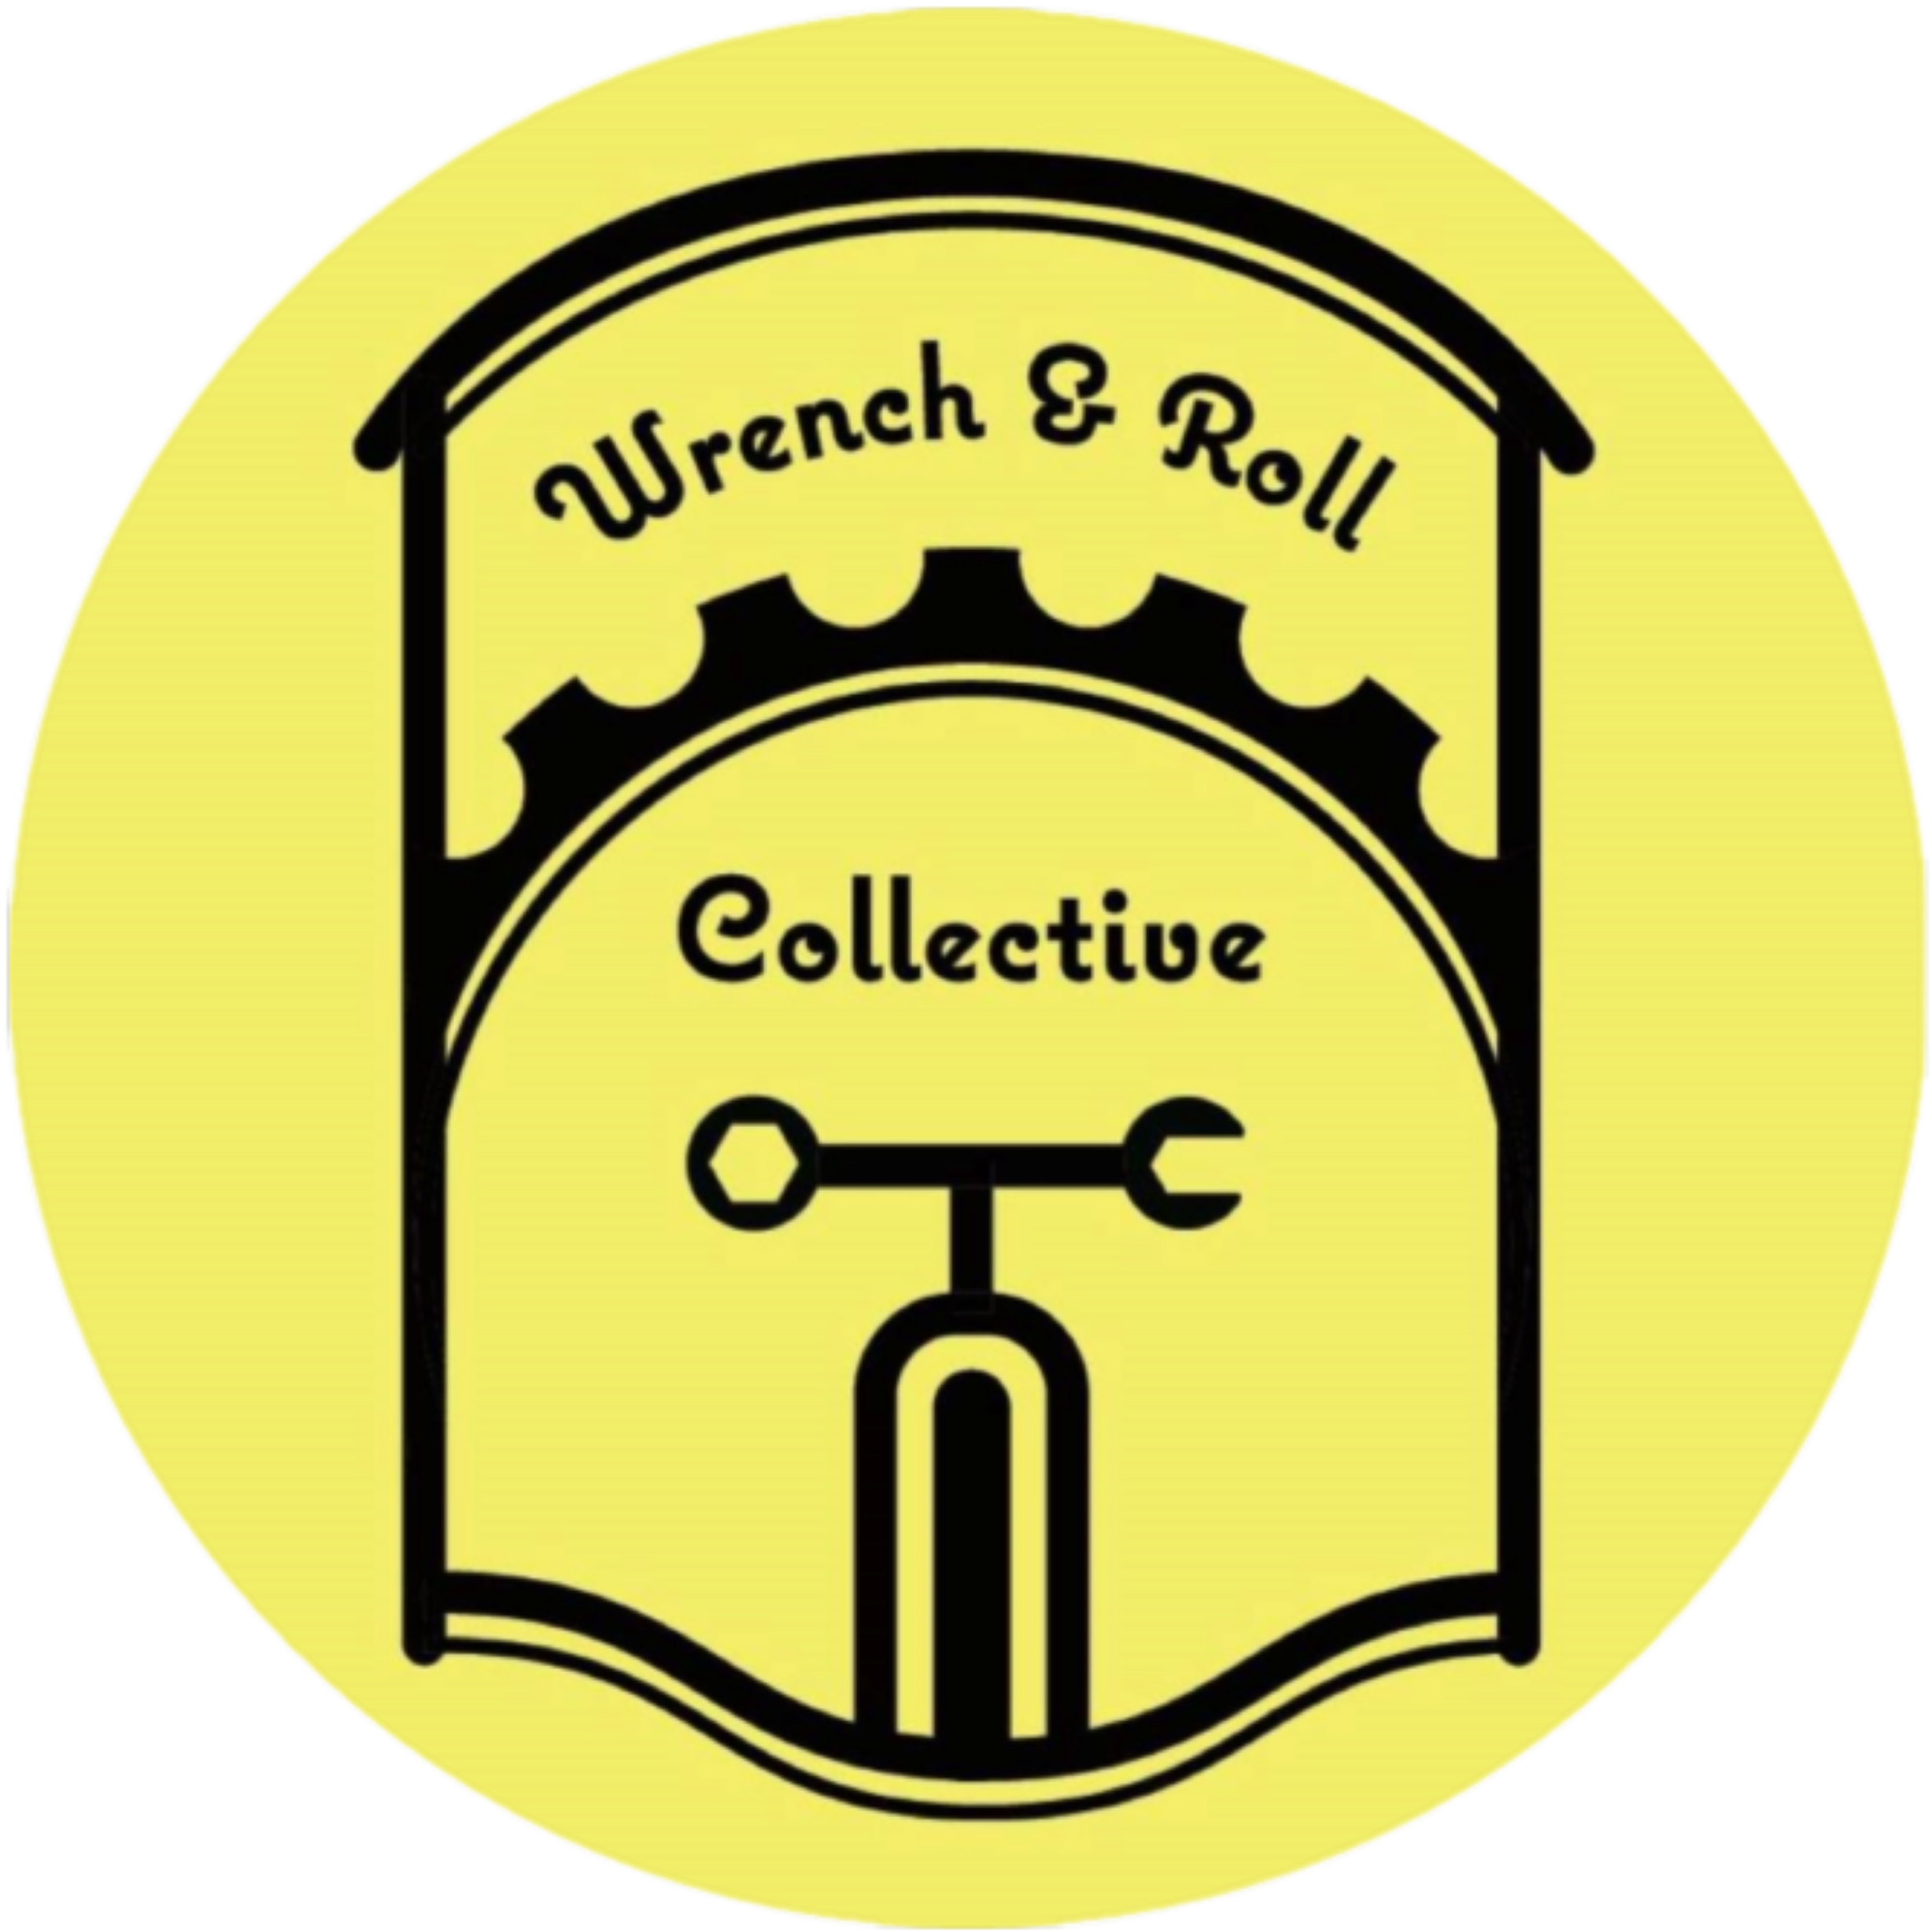 Wrench and Roll Collective